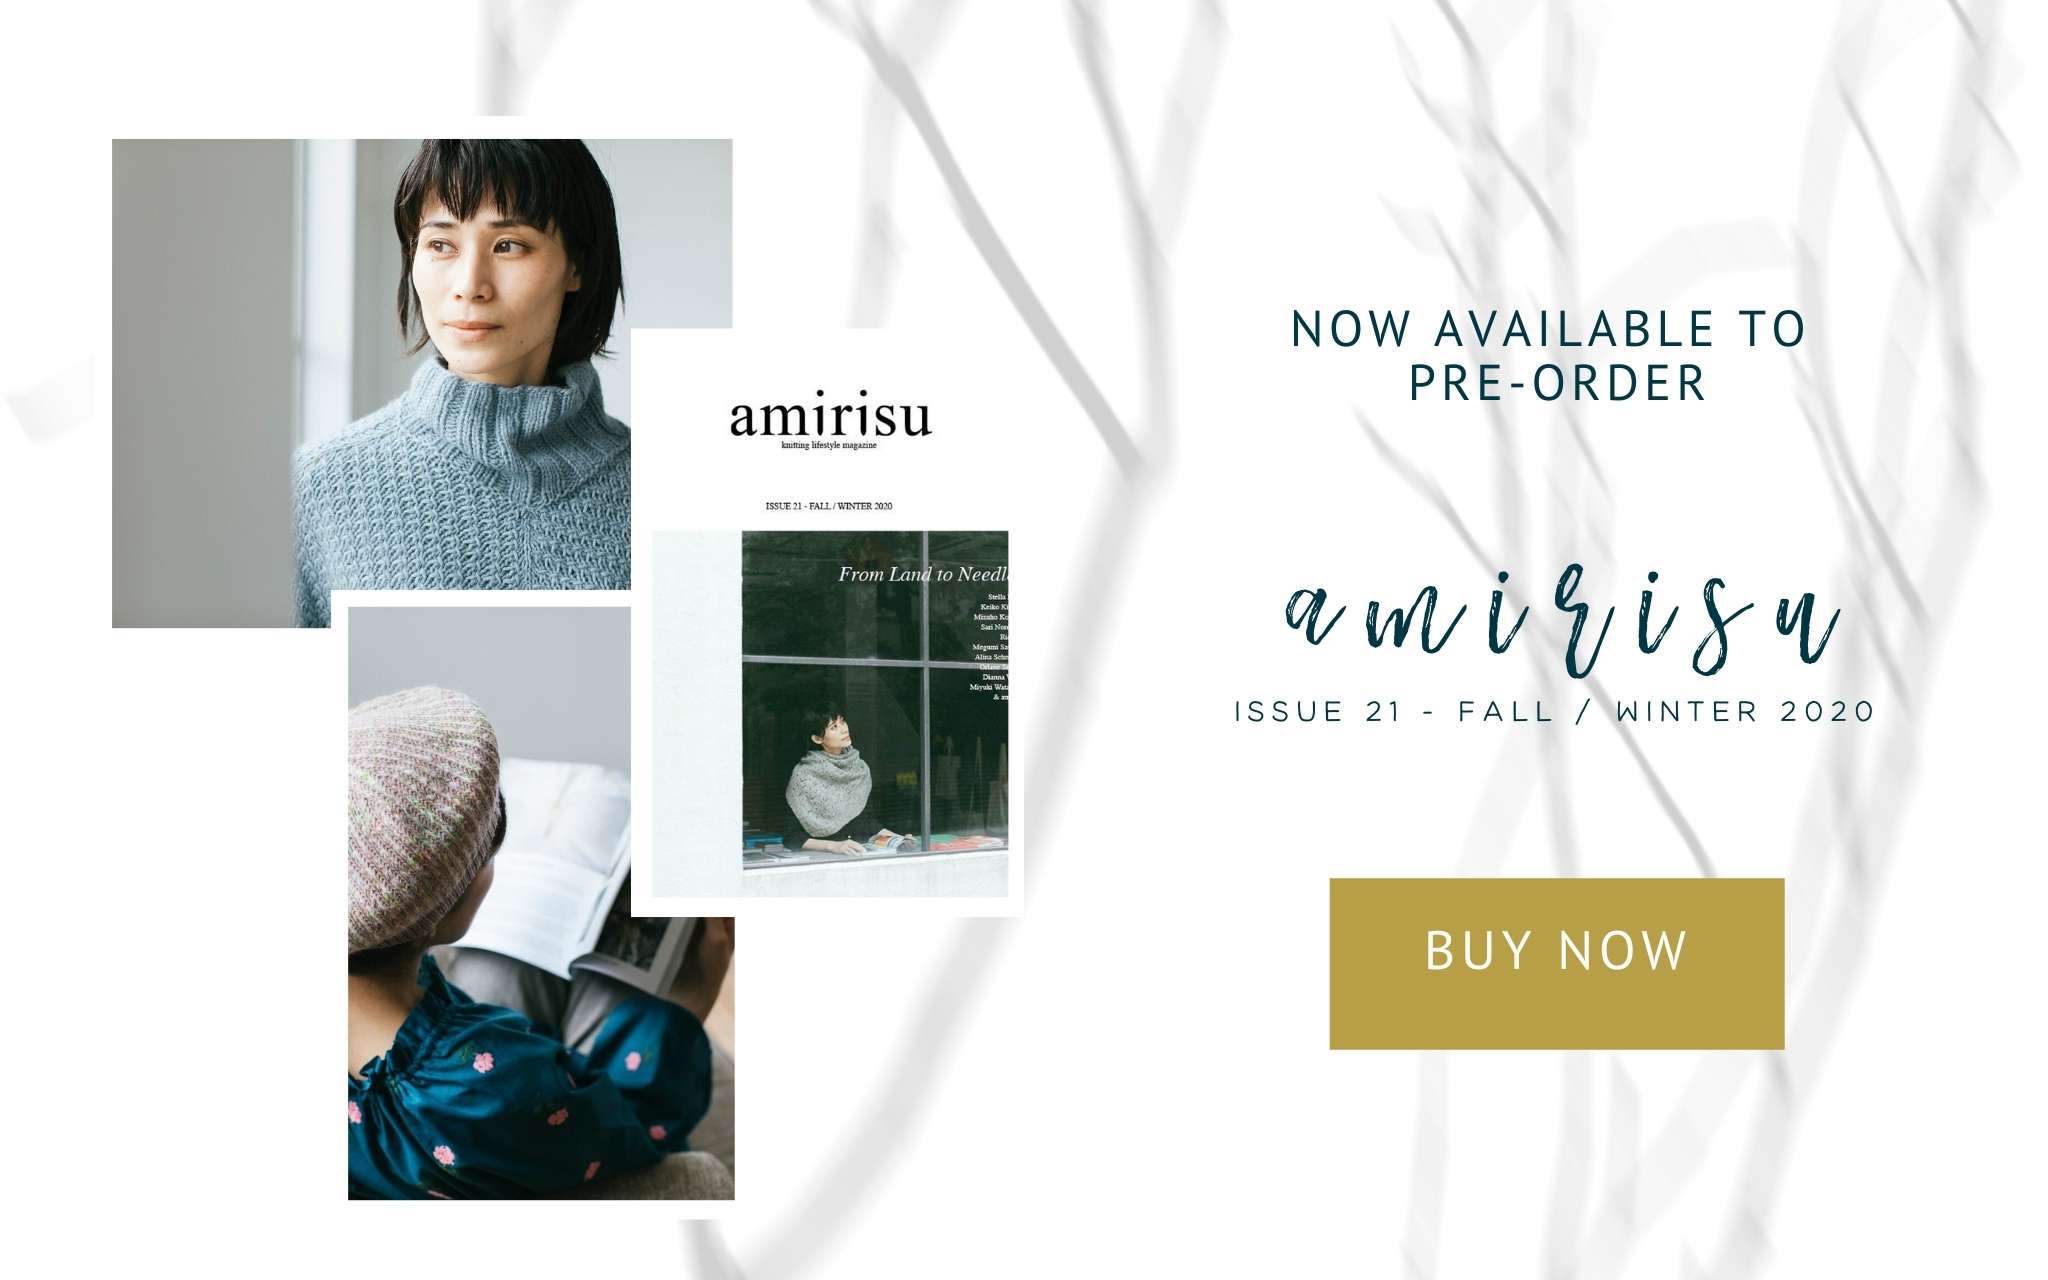 amirisu issue 21 - now available to pre-order